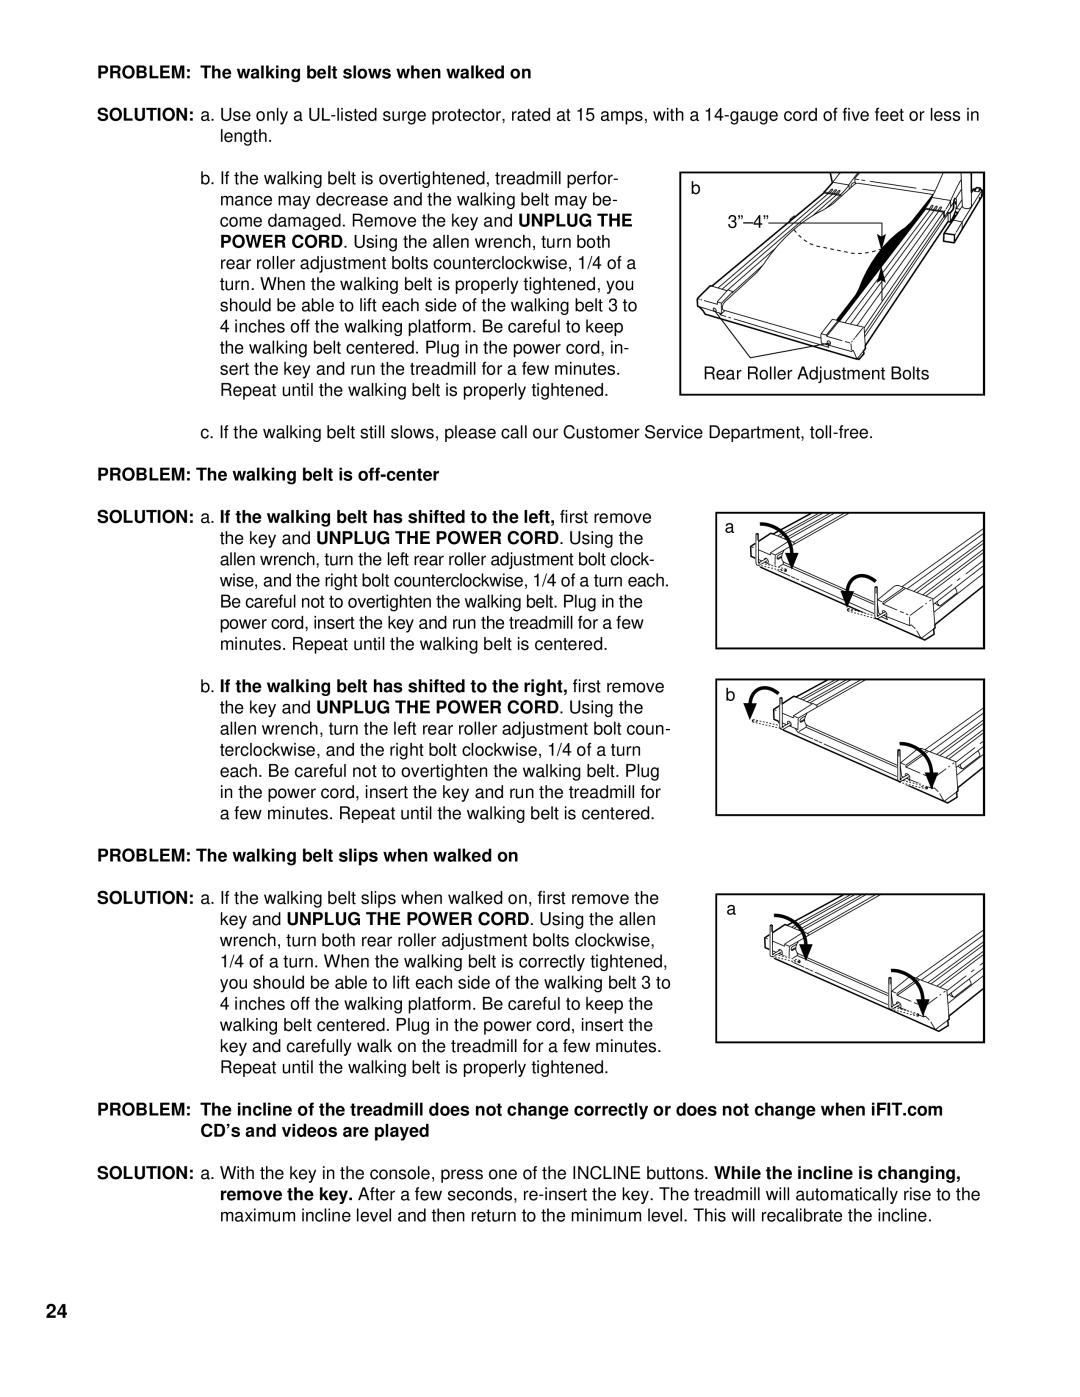 NordicTrack NTTL09994 user manual PROBLEM The walking belt slows when walked on, PROBLEM The walking belt is off-center 